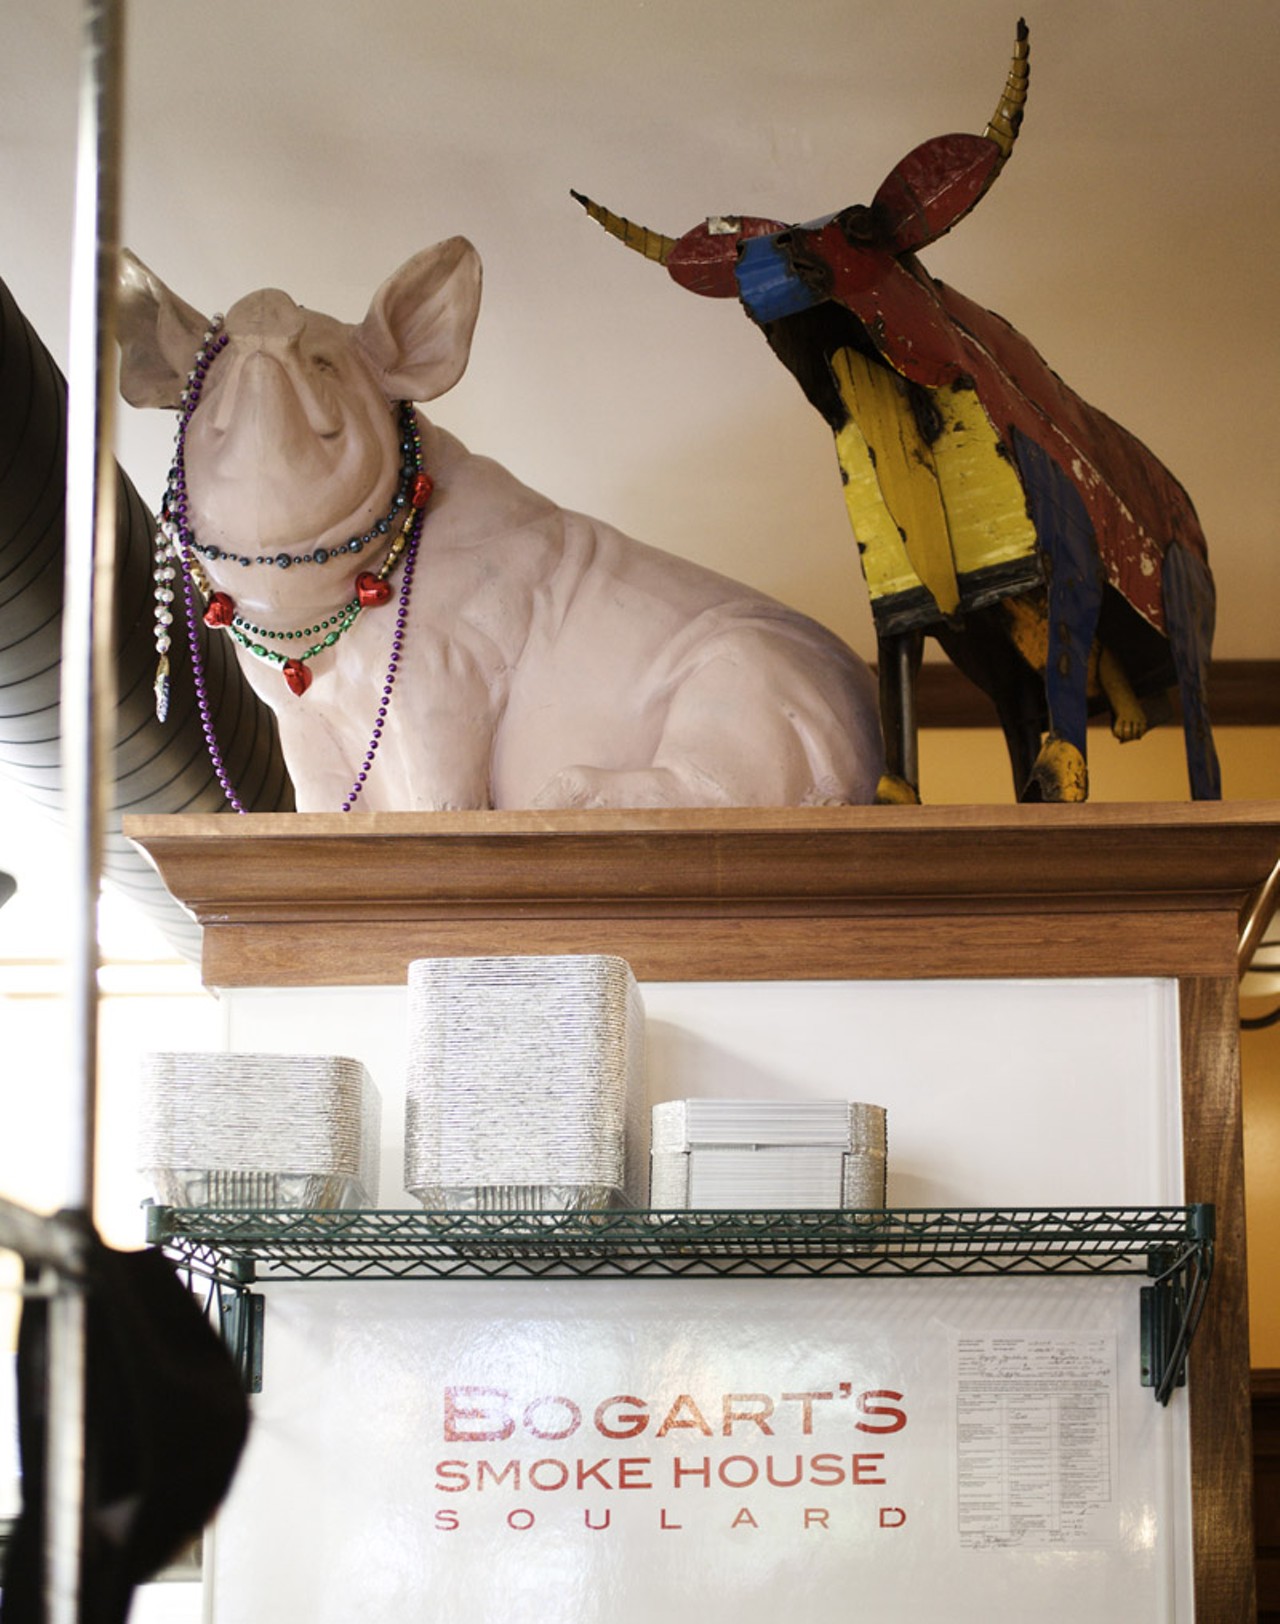 Pig is the theme at Bogart's smokehouse.